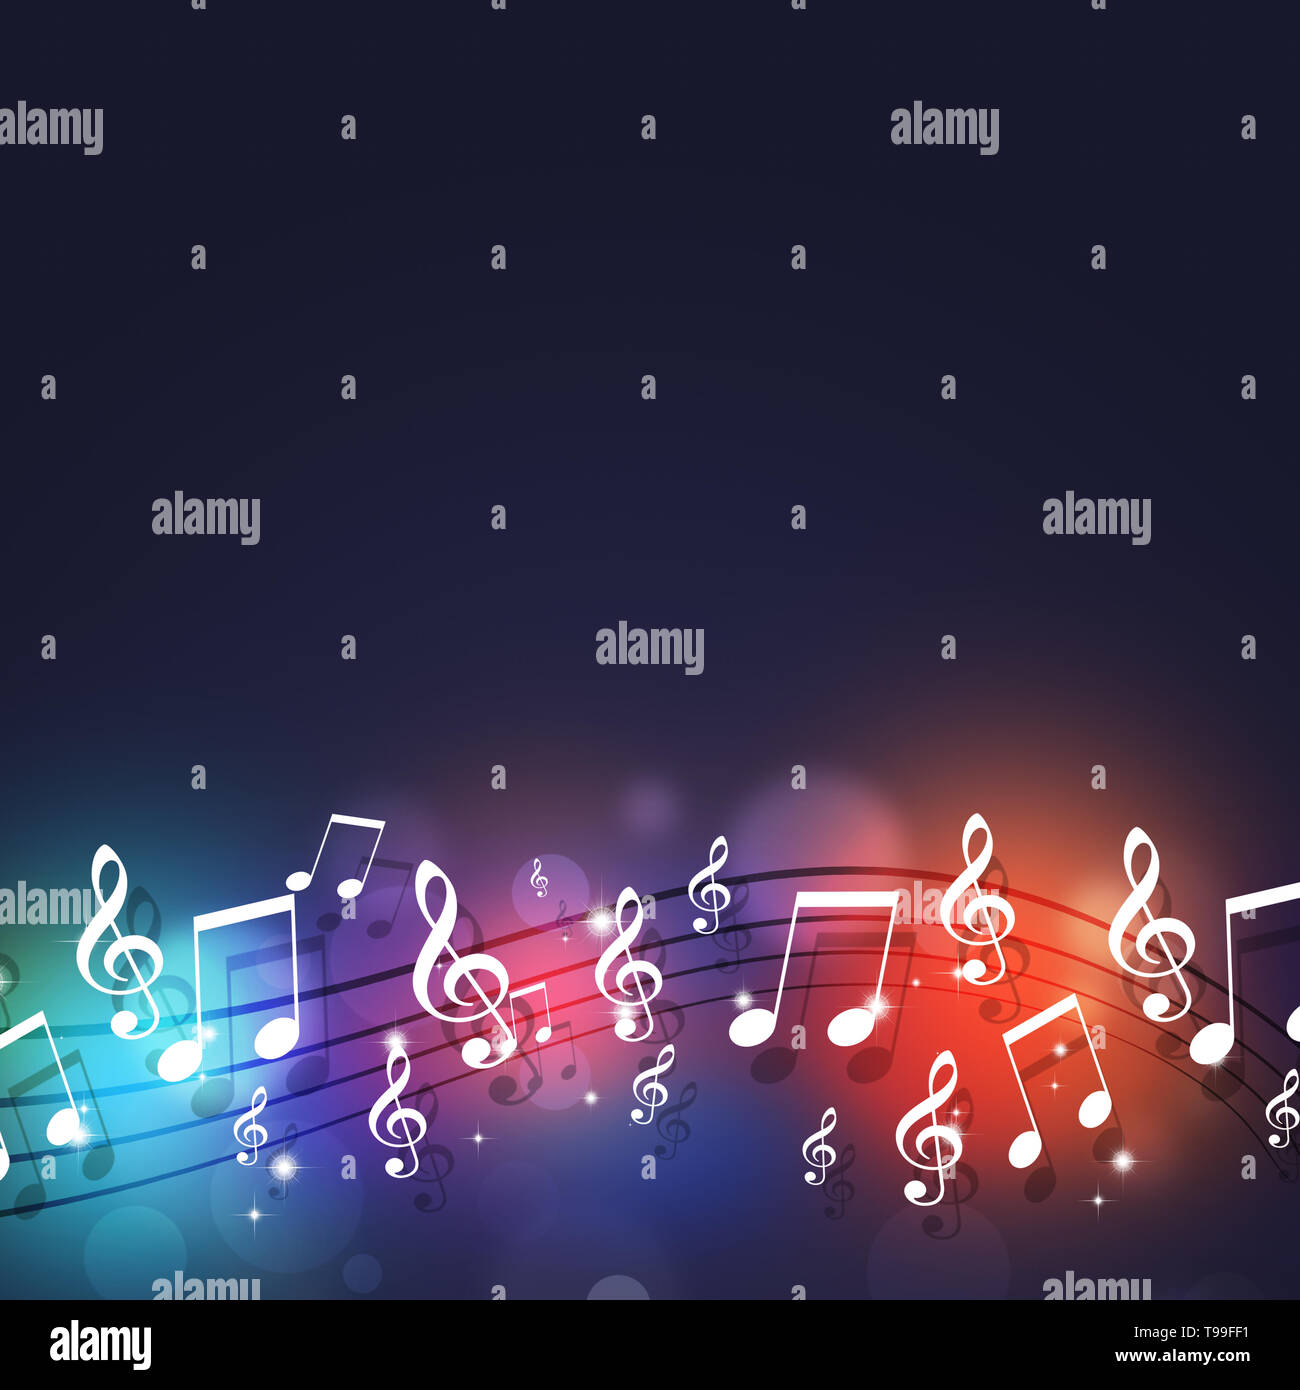 noise party background with multicolor music notes Stock Photo